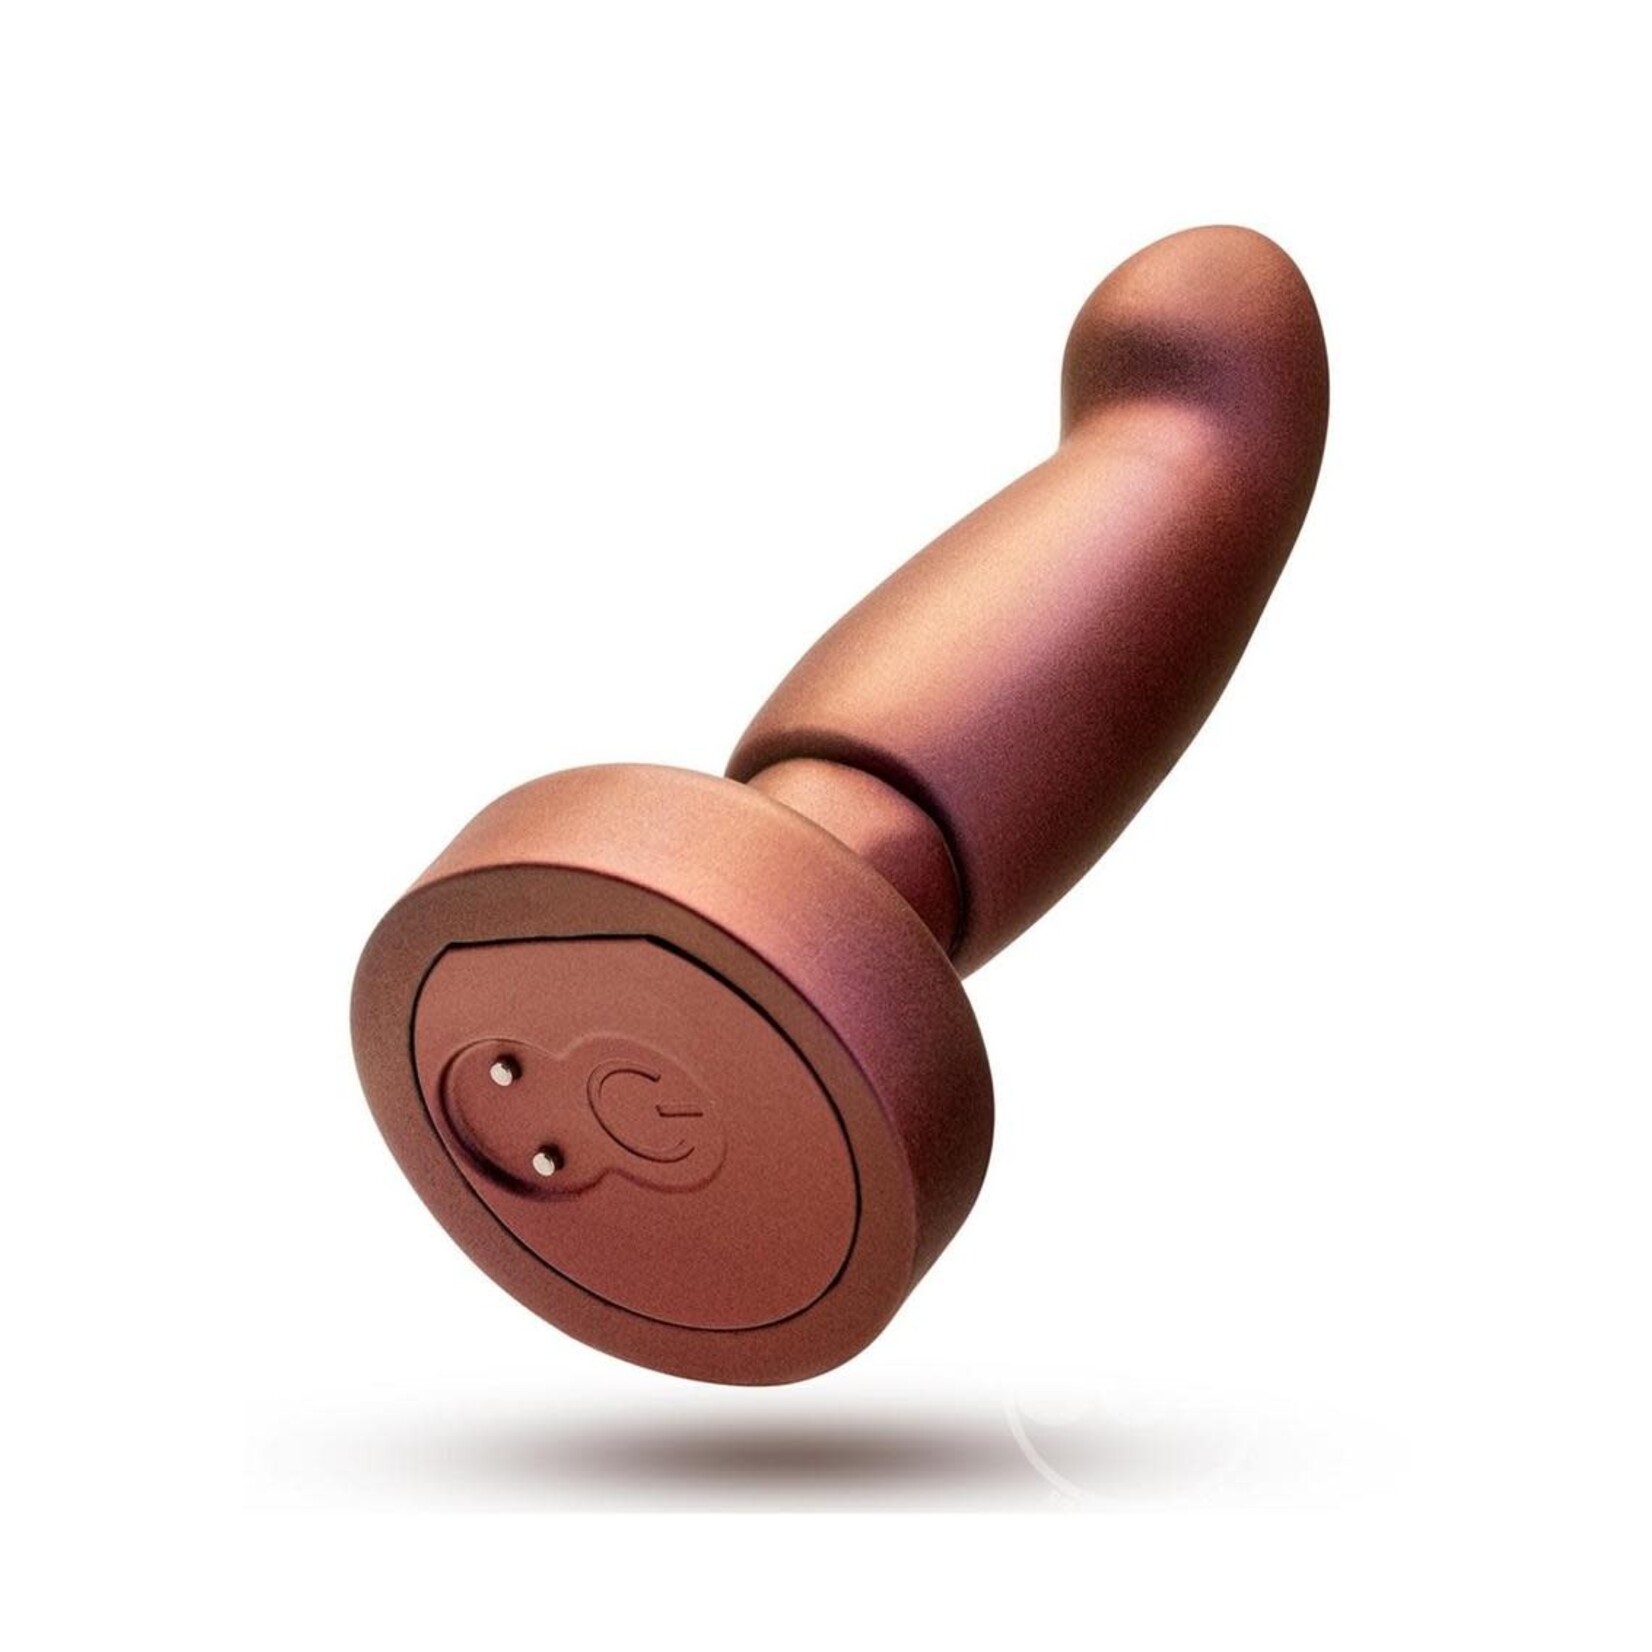 Anal Adventures Matrix Bionic Plug Rechargeable Silicone Anal Plug with Remote - Cosmic Copper